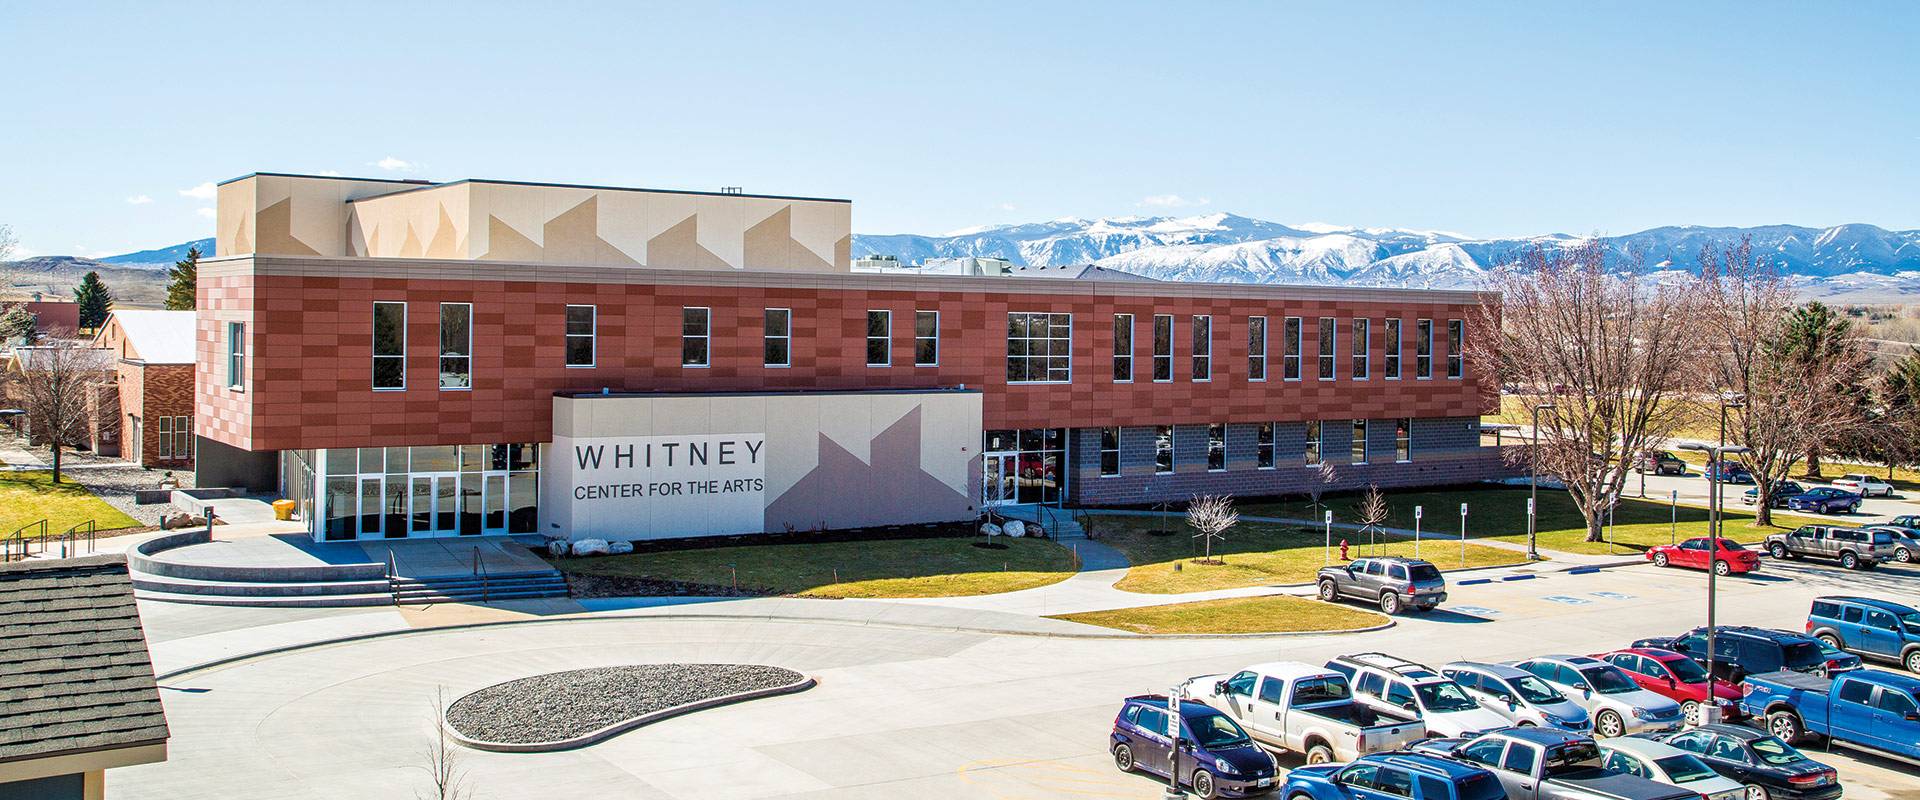 Whitney Center for the Arts building with snowy mountains in the background